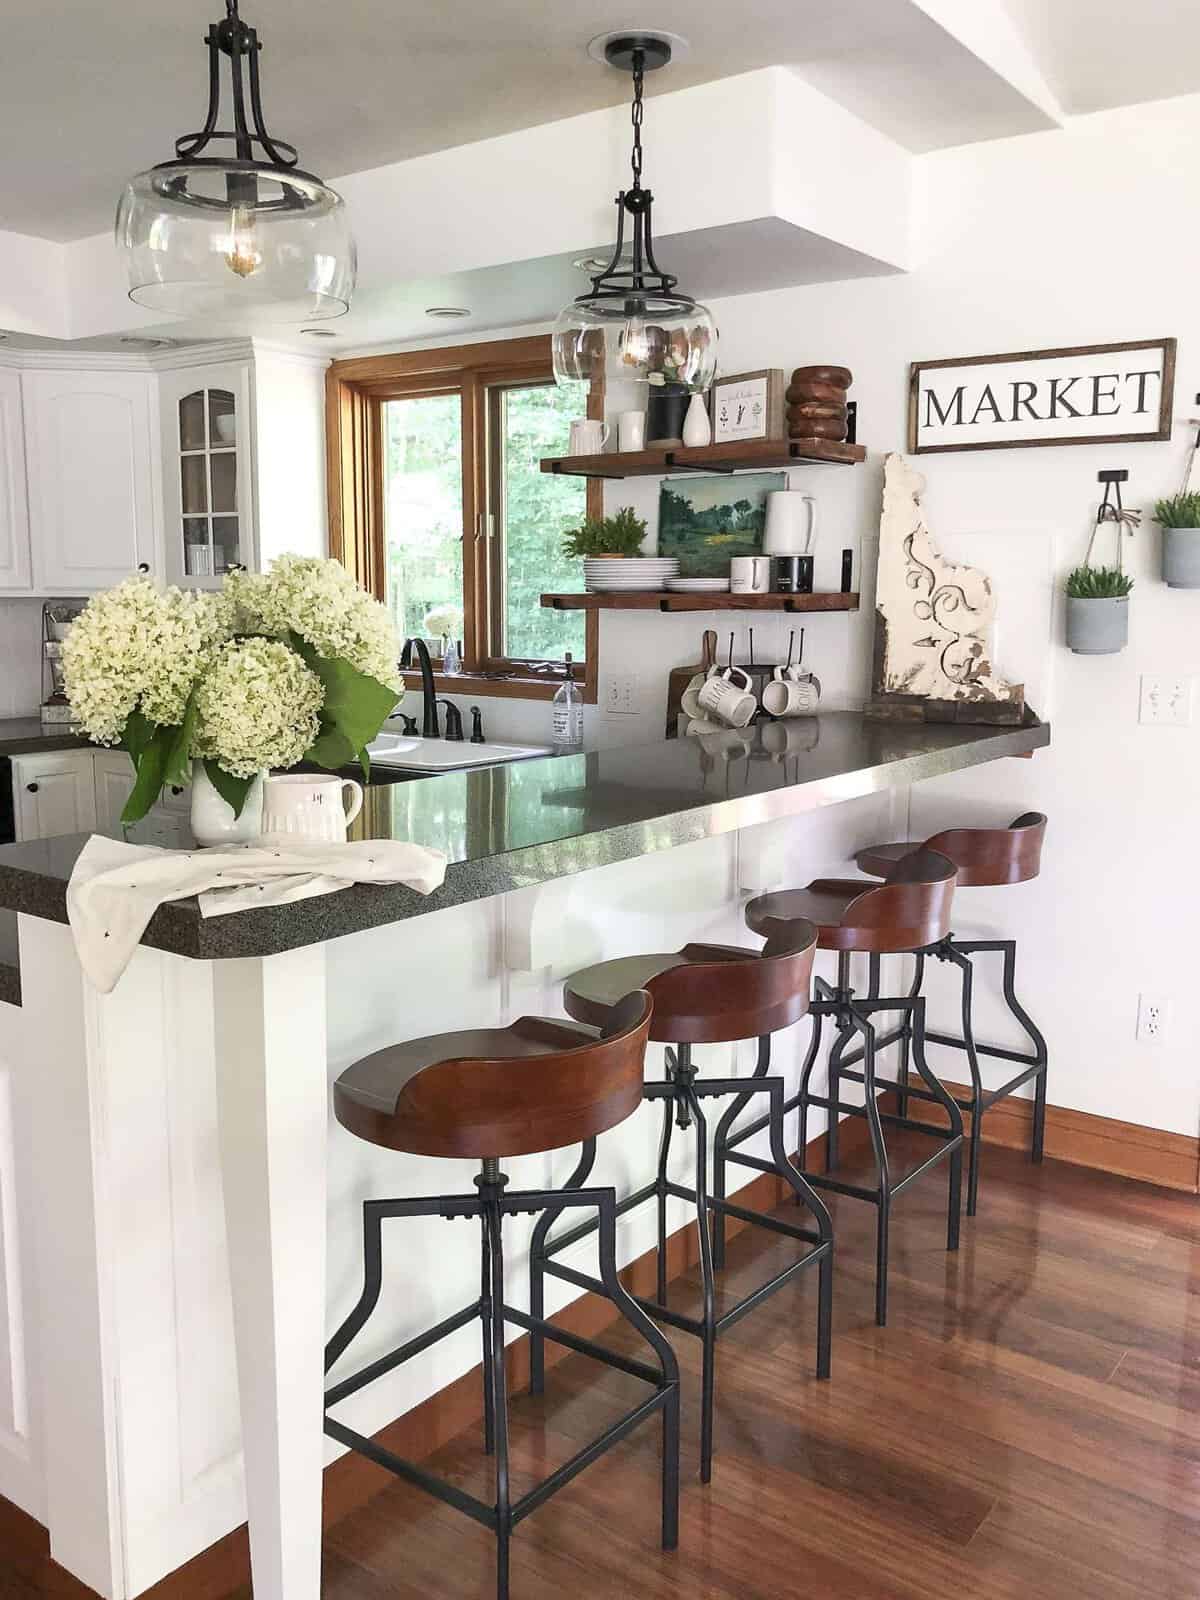 2018 has been a year of change and new adventures! Here are my top 10 posts for my 2018 year in review. #fromhousetohaven #modernfarmhousedecor #homeremodel